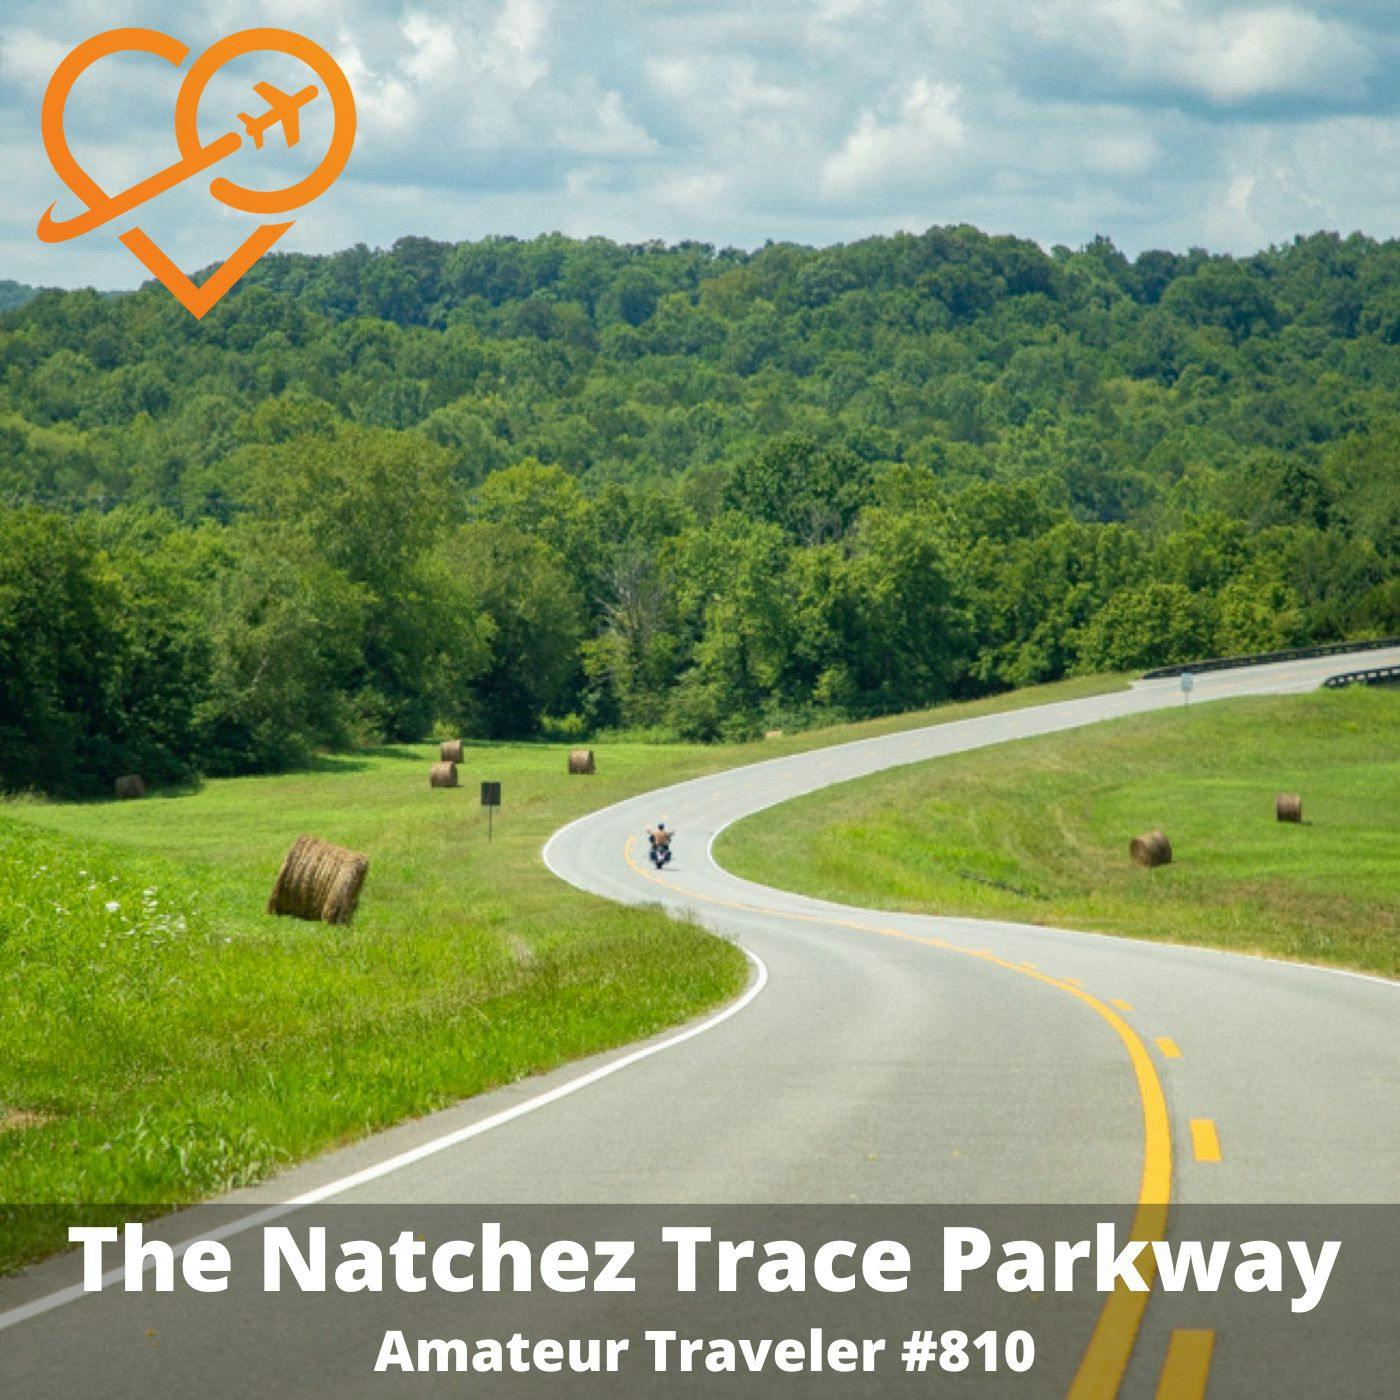 AT#810 - Driving the Natchez Trace Parkway